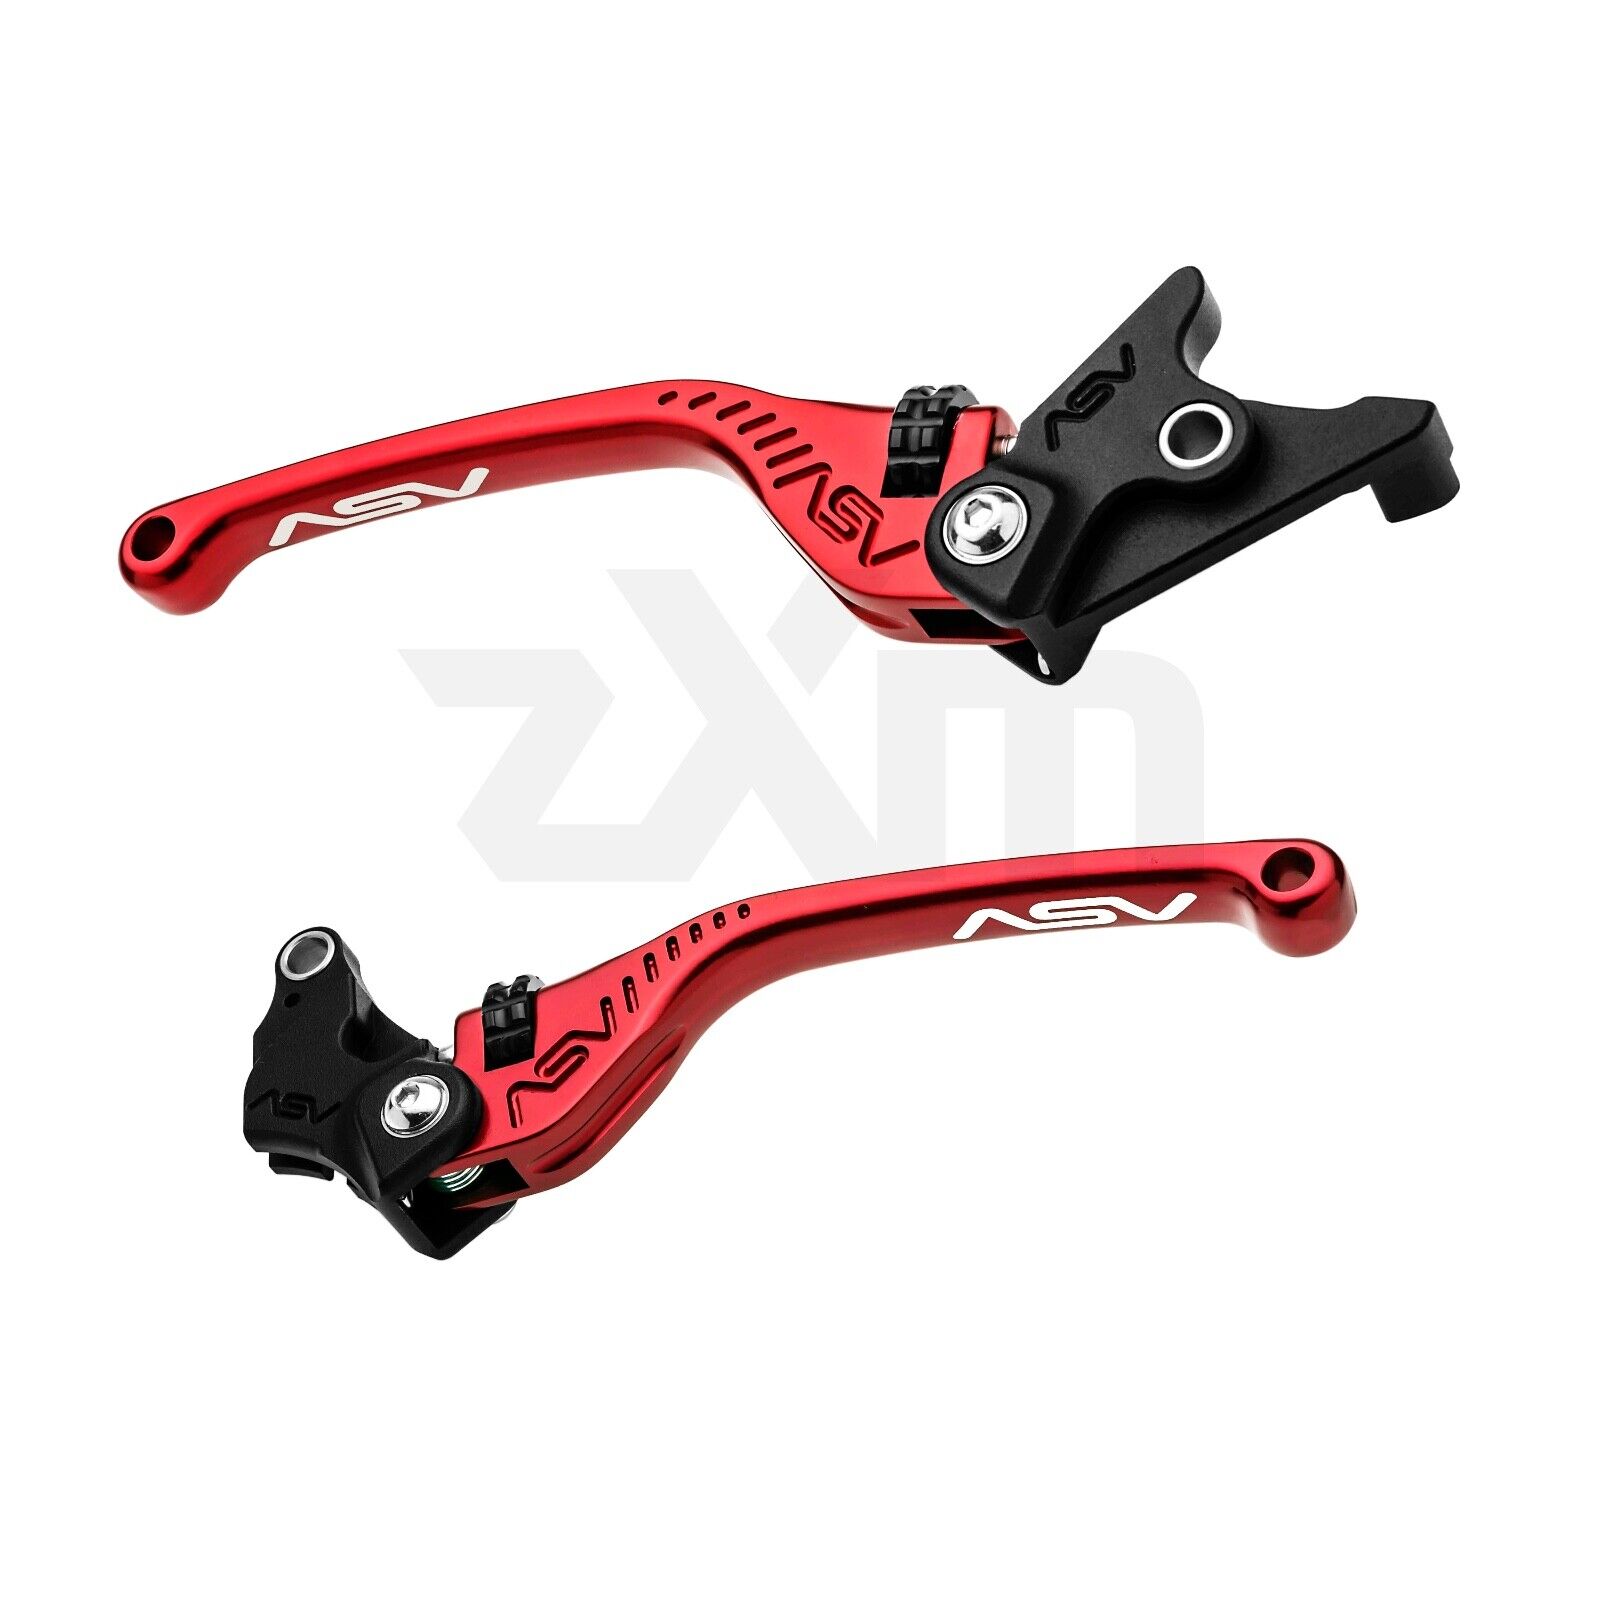 2020-2024 Yamaha Tenere 700 ASV Inventions F3 Series Brake & Clutch Levers Red